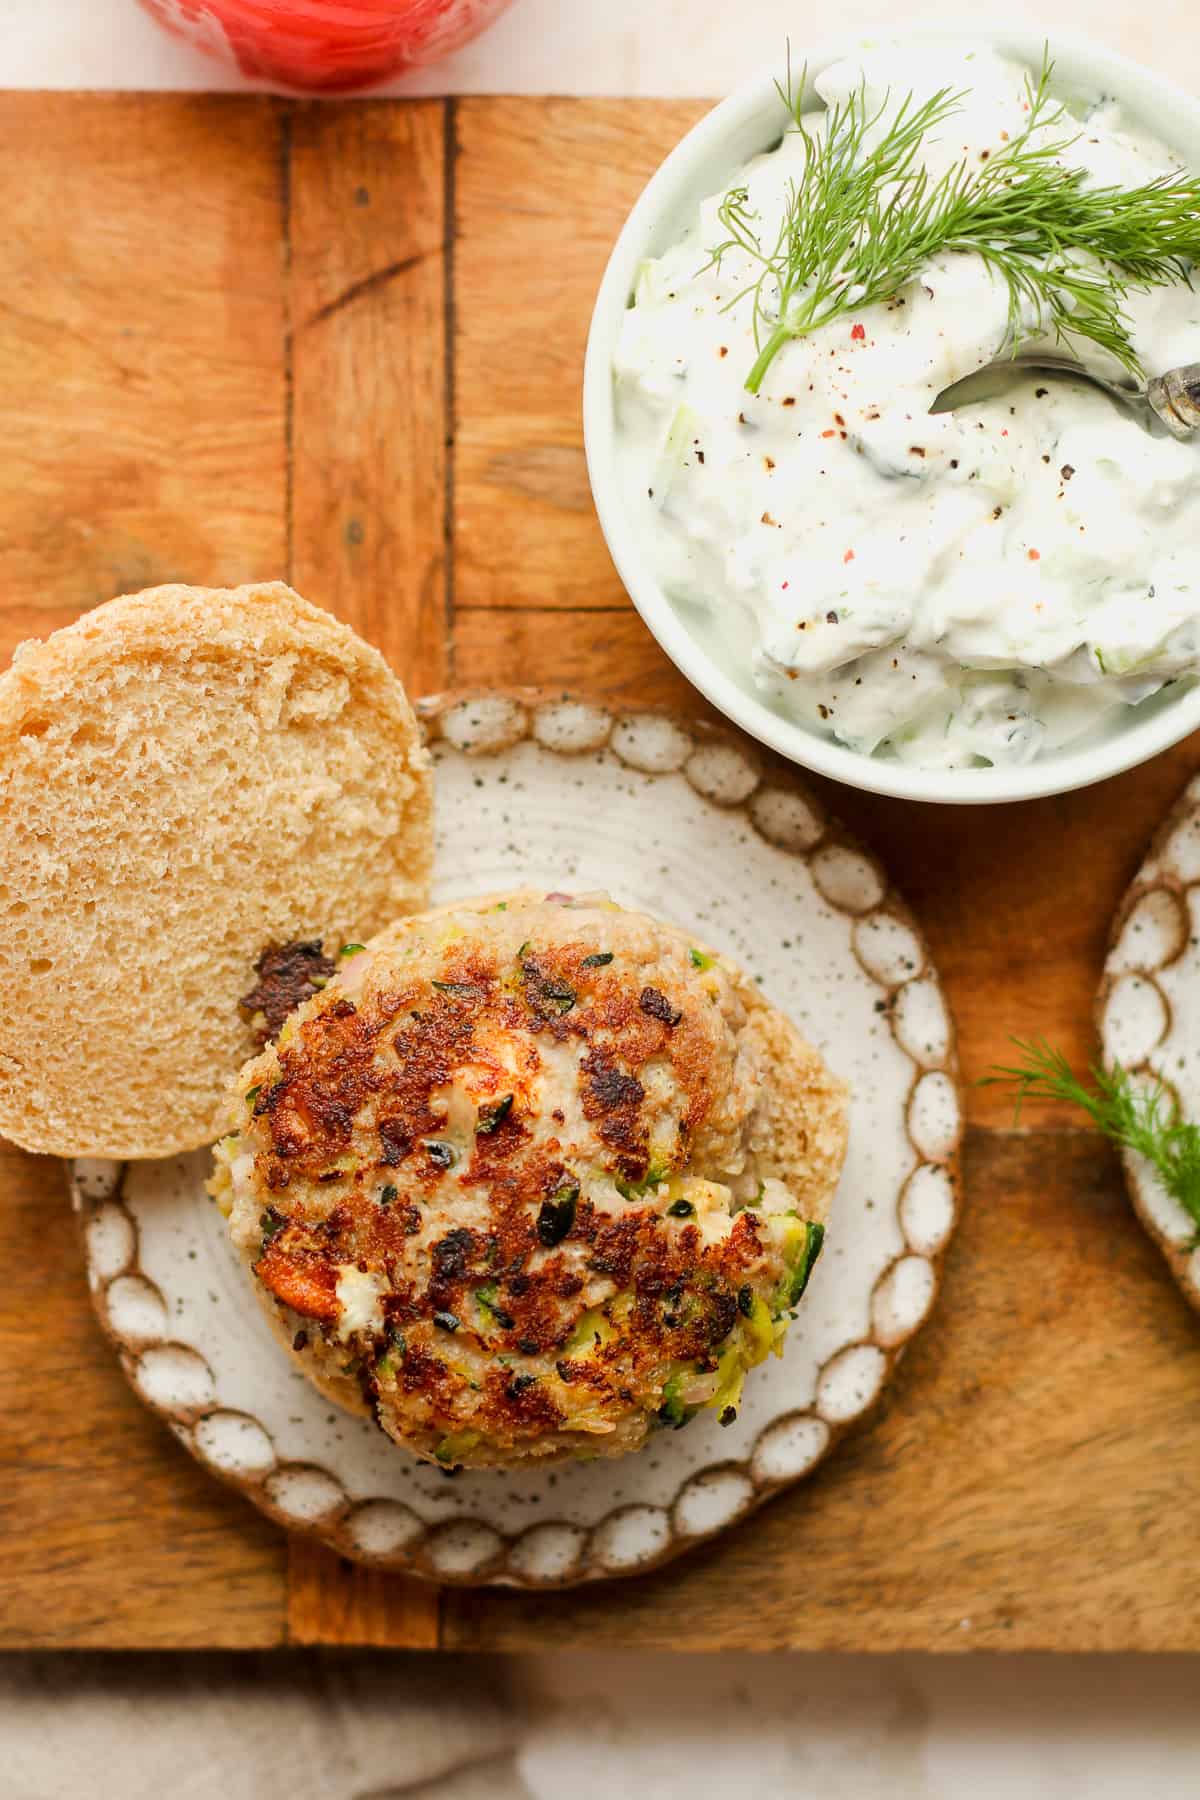 Overhead view of a turkey burger with a bowl of tzatziki sauce.